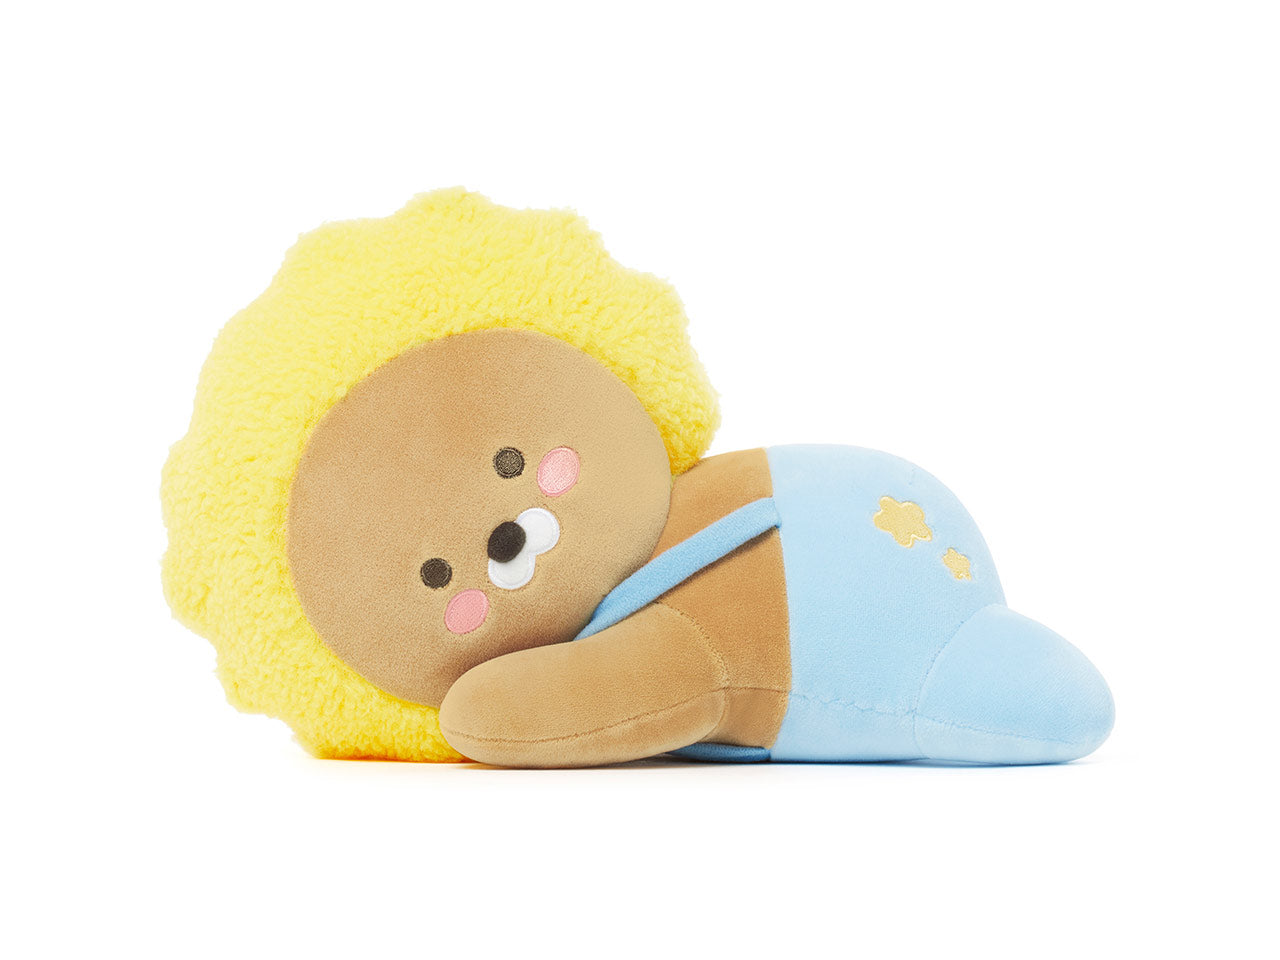 kakao friends jay-g in skyblue overall plush toy front